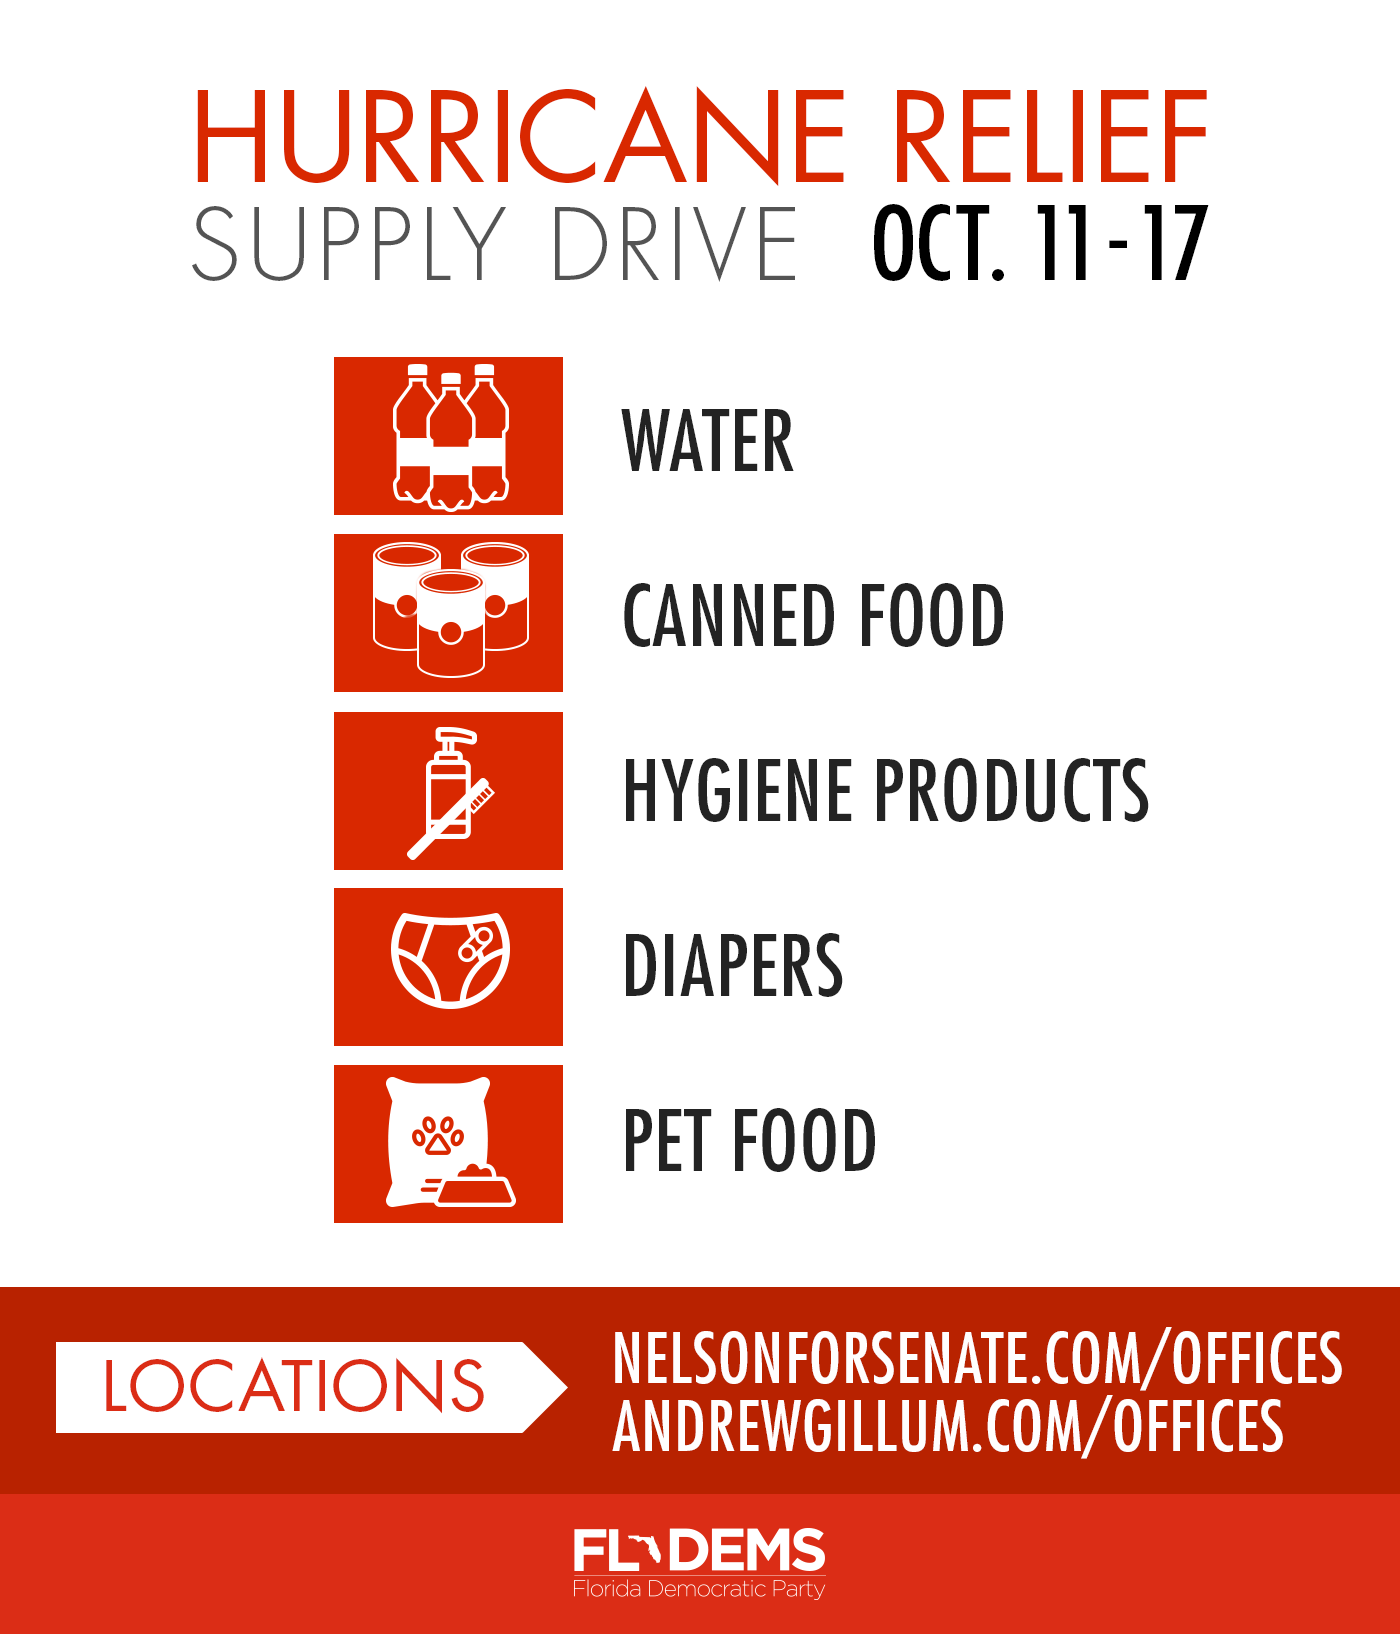 Florida Democratic Party Campaign Offices Collecting Donations For Hurricane Relief Florida 